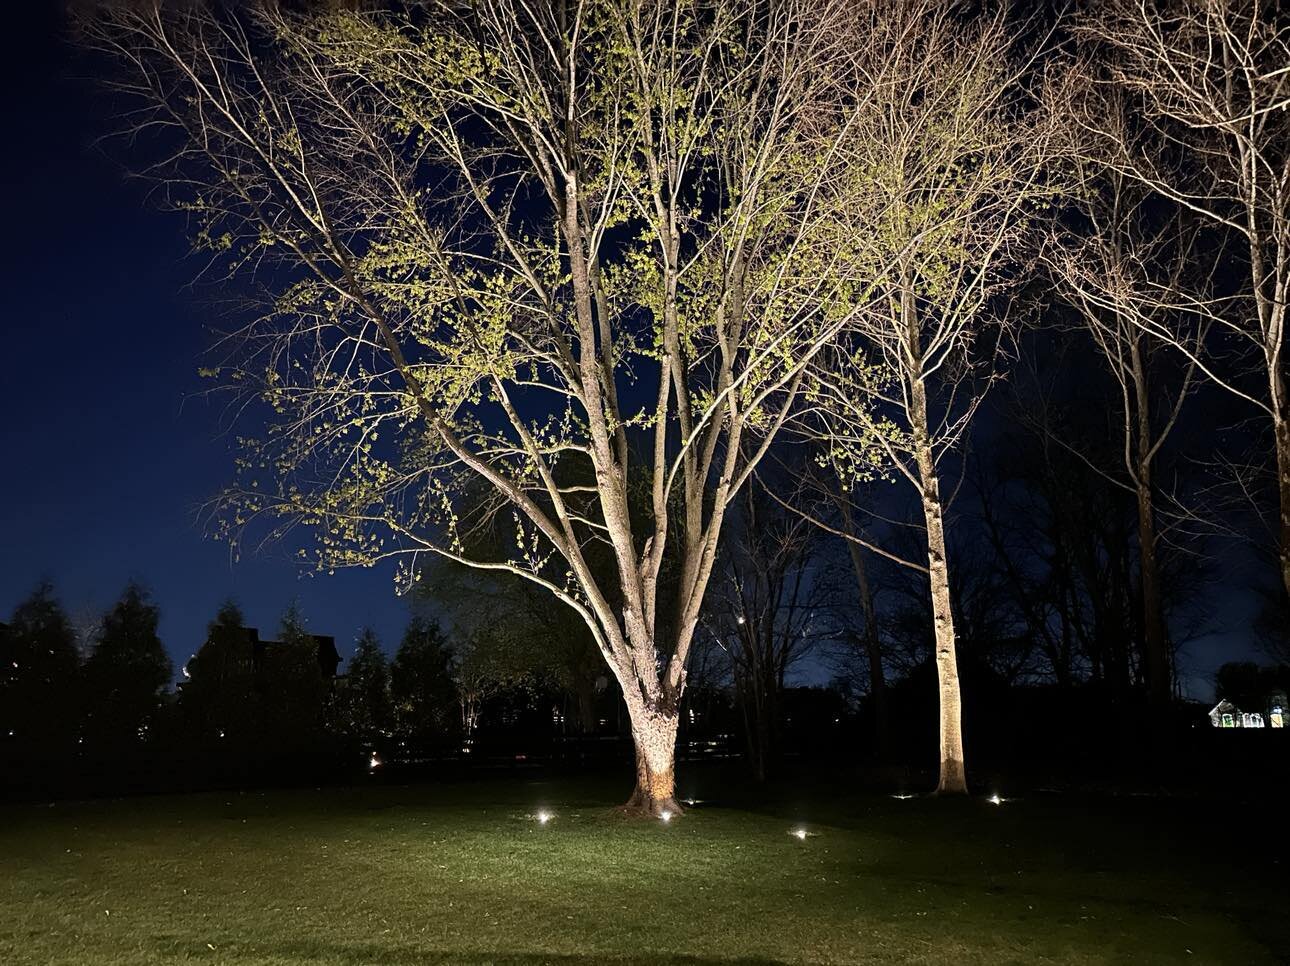 🌟This week in Bentonville, Arkansas we completed another stunning landscaping lighting project! 🌳💡 

For this part of the project, we used well lights to illuminate the trees. These discreet fixtures elegantly illuminate the canopy in an even, war